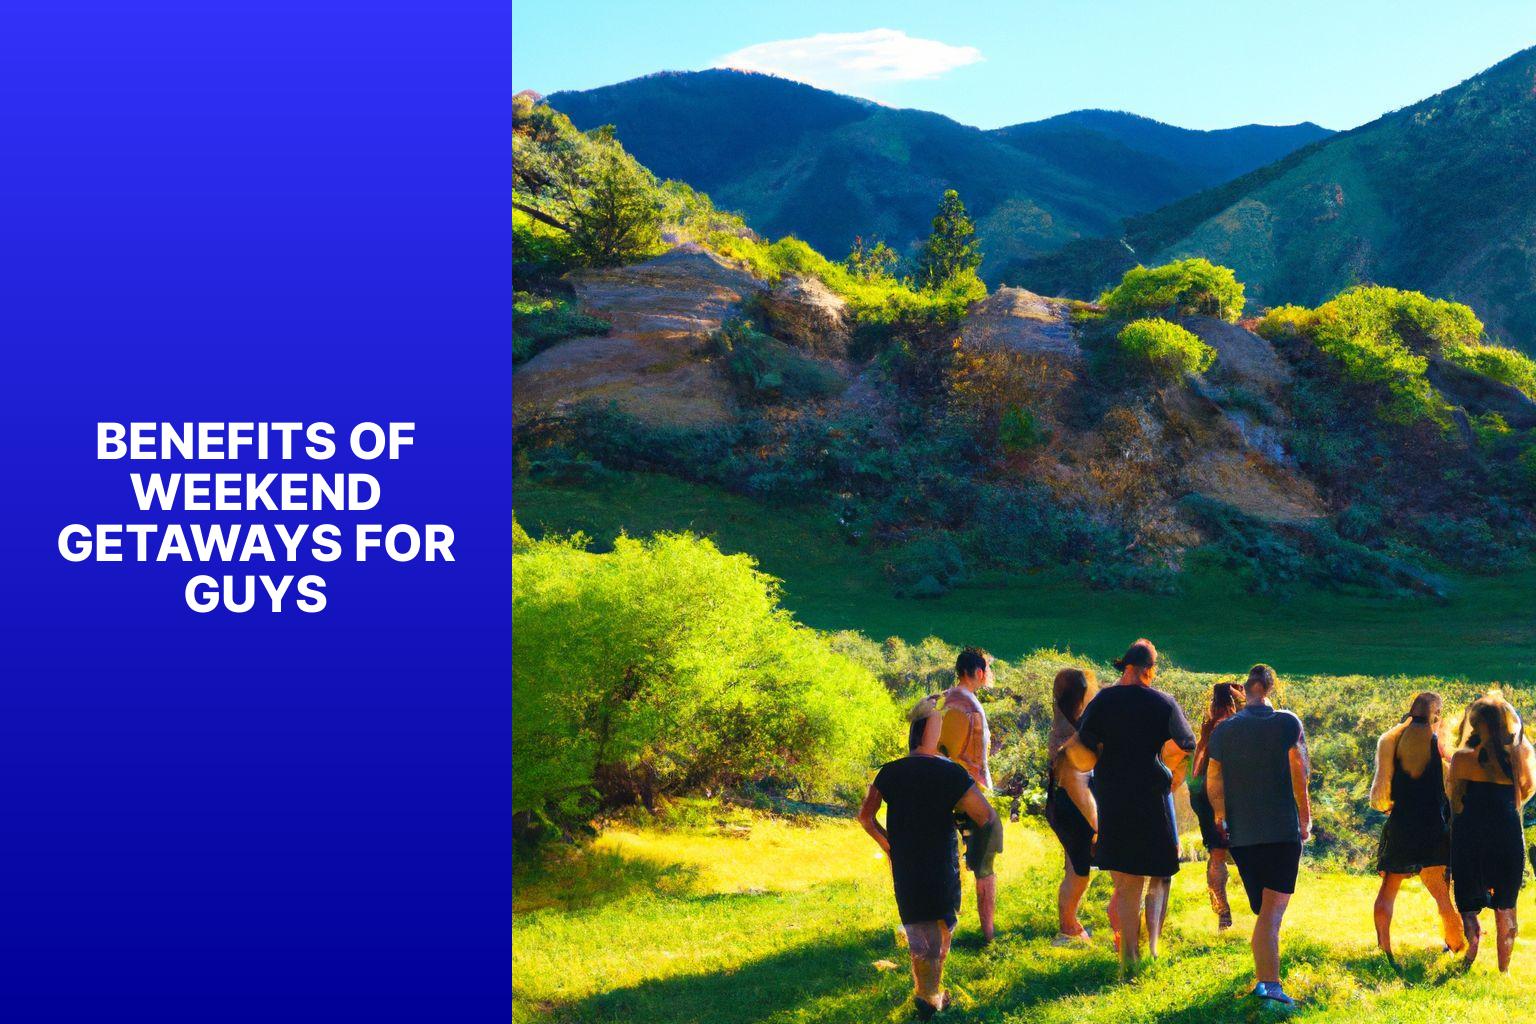 Benefits of Weekend Getaways for Guys - Weekend Getaways for Guys: Quick and Exciting Escapes 